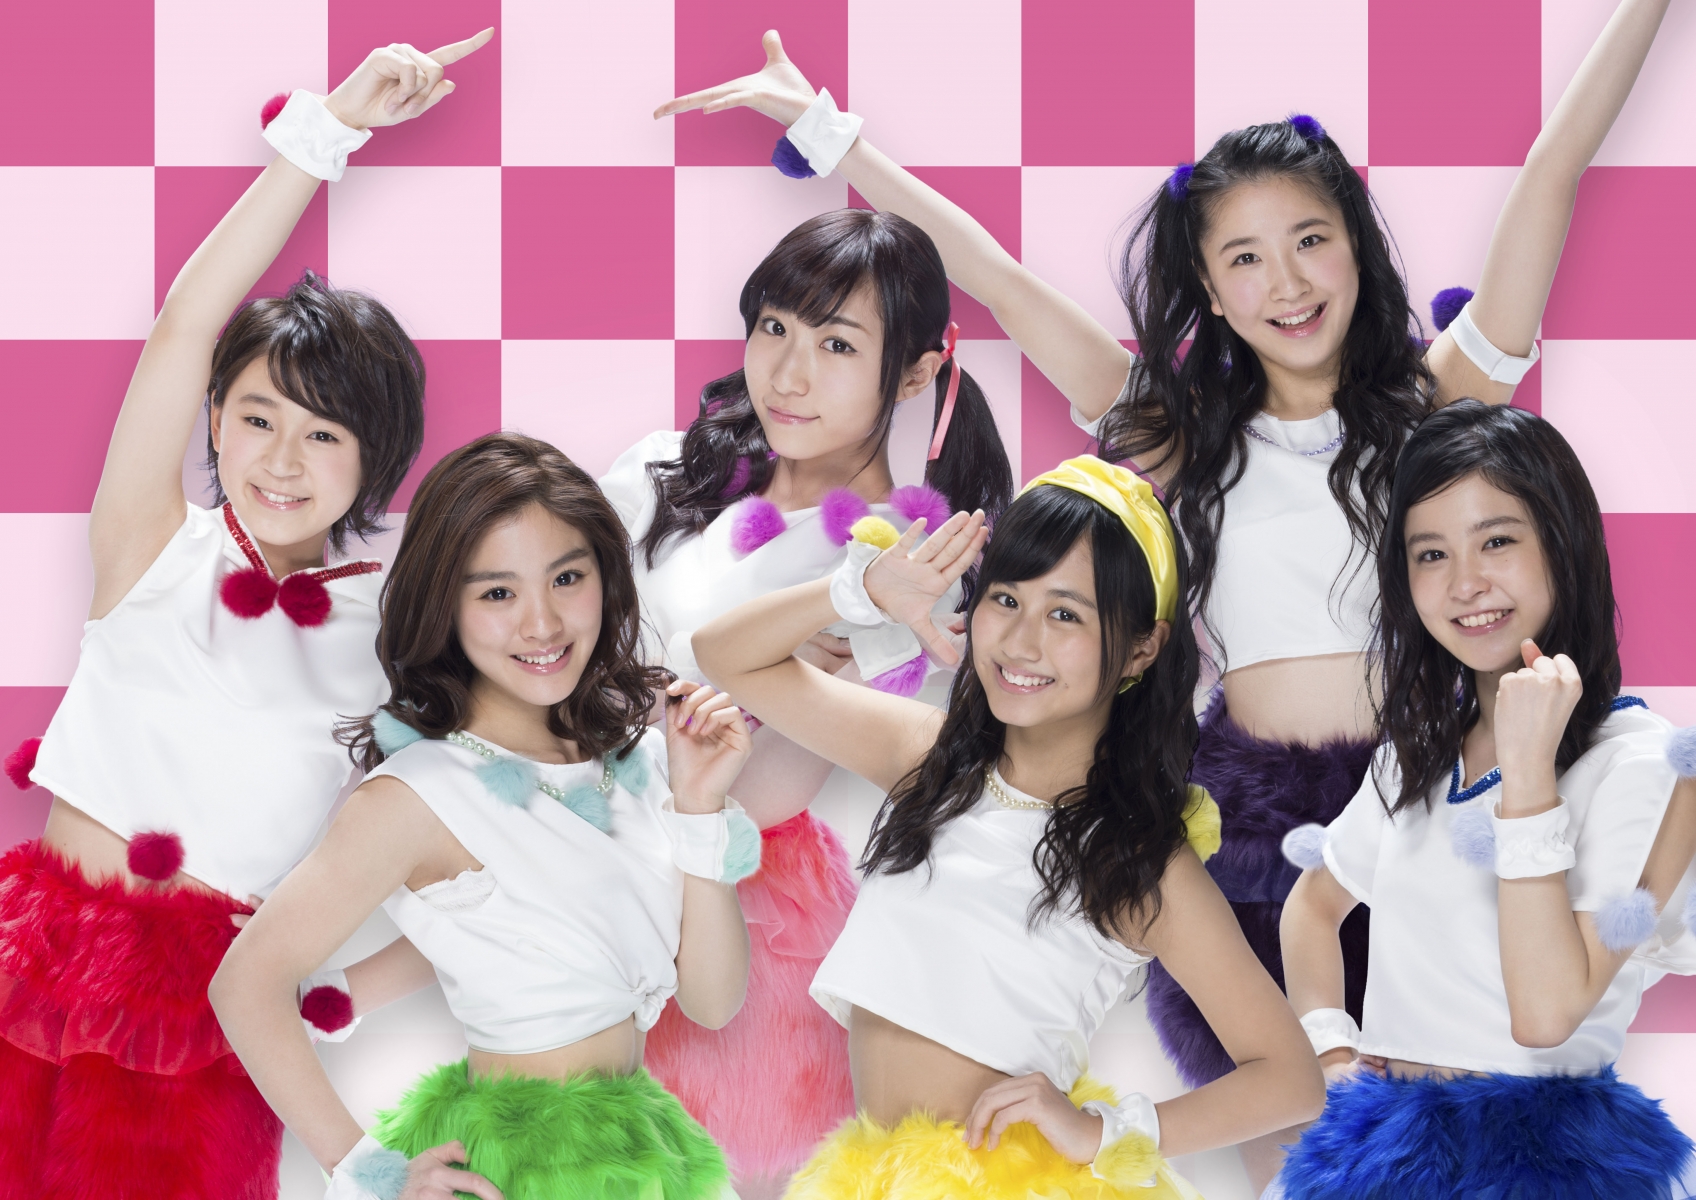 Peep the Bright and Cheerful MV for La PomPon’s 2nd Single “HOT GIRLS”!